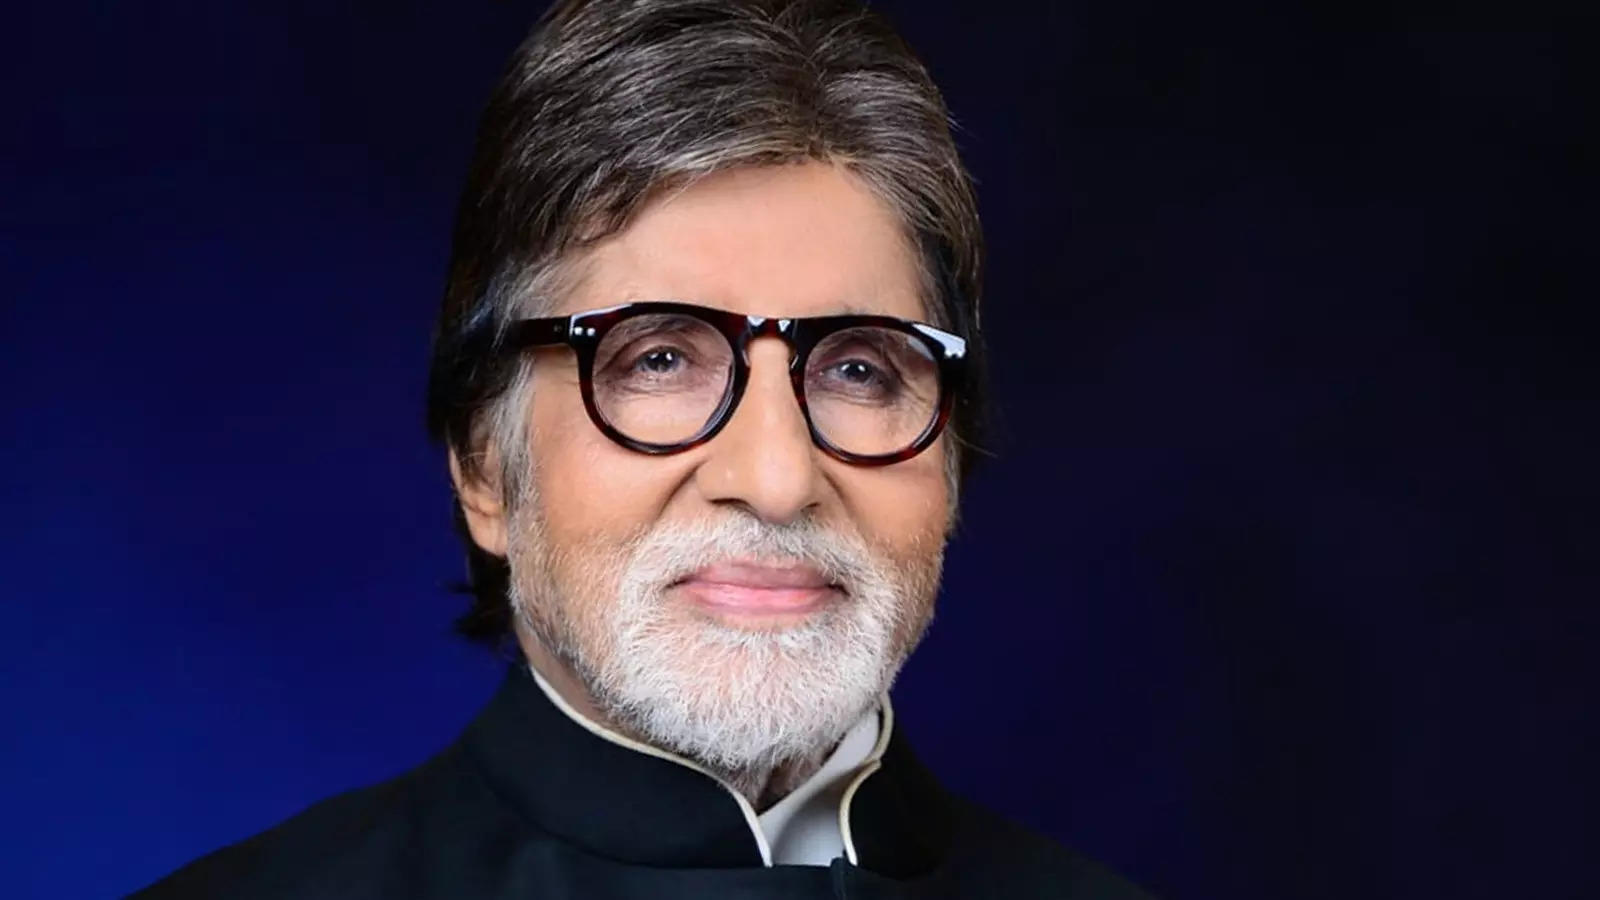 Amitabh Bachchan - 4 Wallpapers - Bollywood Wallpapers Download, Indian Hot  Celebrities Wallpapers, Bollywood Actors And Actorsses, Hot Wallpapers  Download, Desktop Wallpapers, Sexy Bollywood Actresses